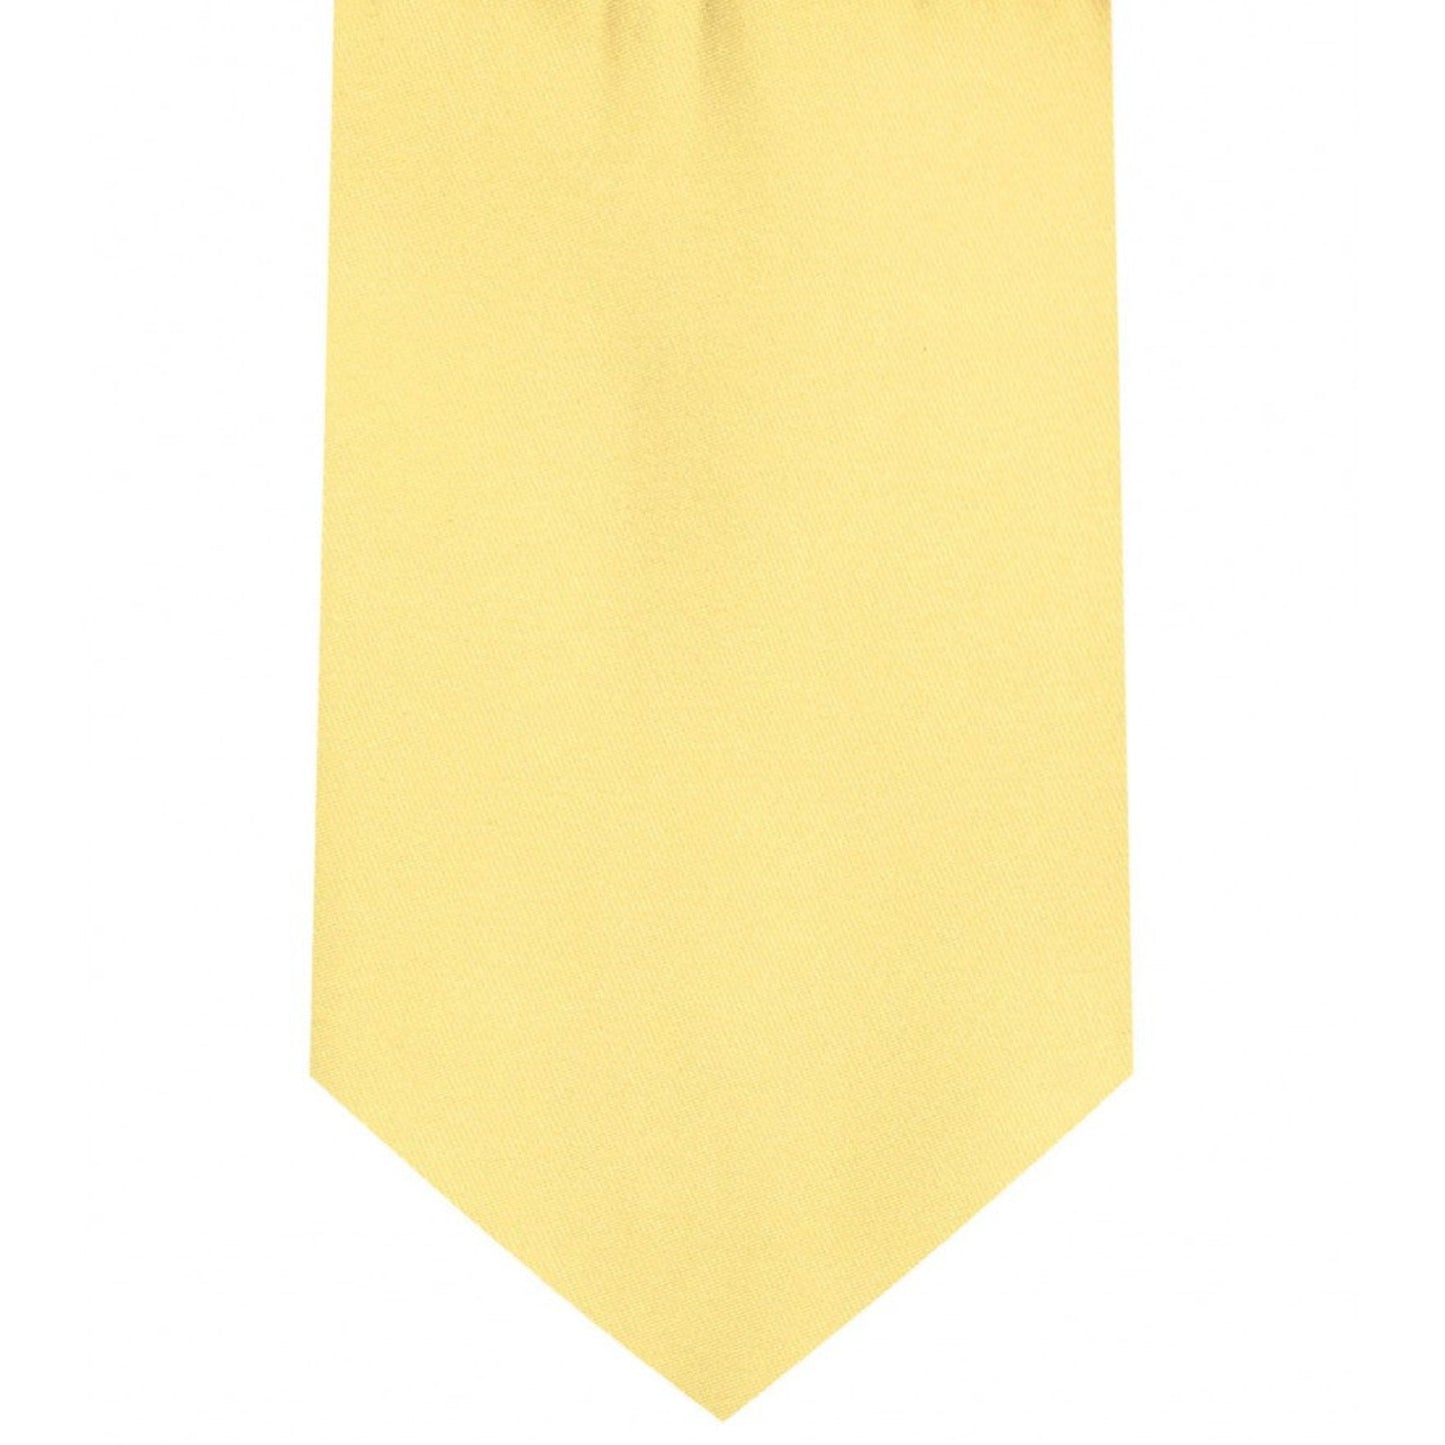 Classic Banana Yellow Tie Regular width 3.5 inches With Matching Pocket Square | KCT Menswear 